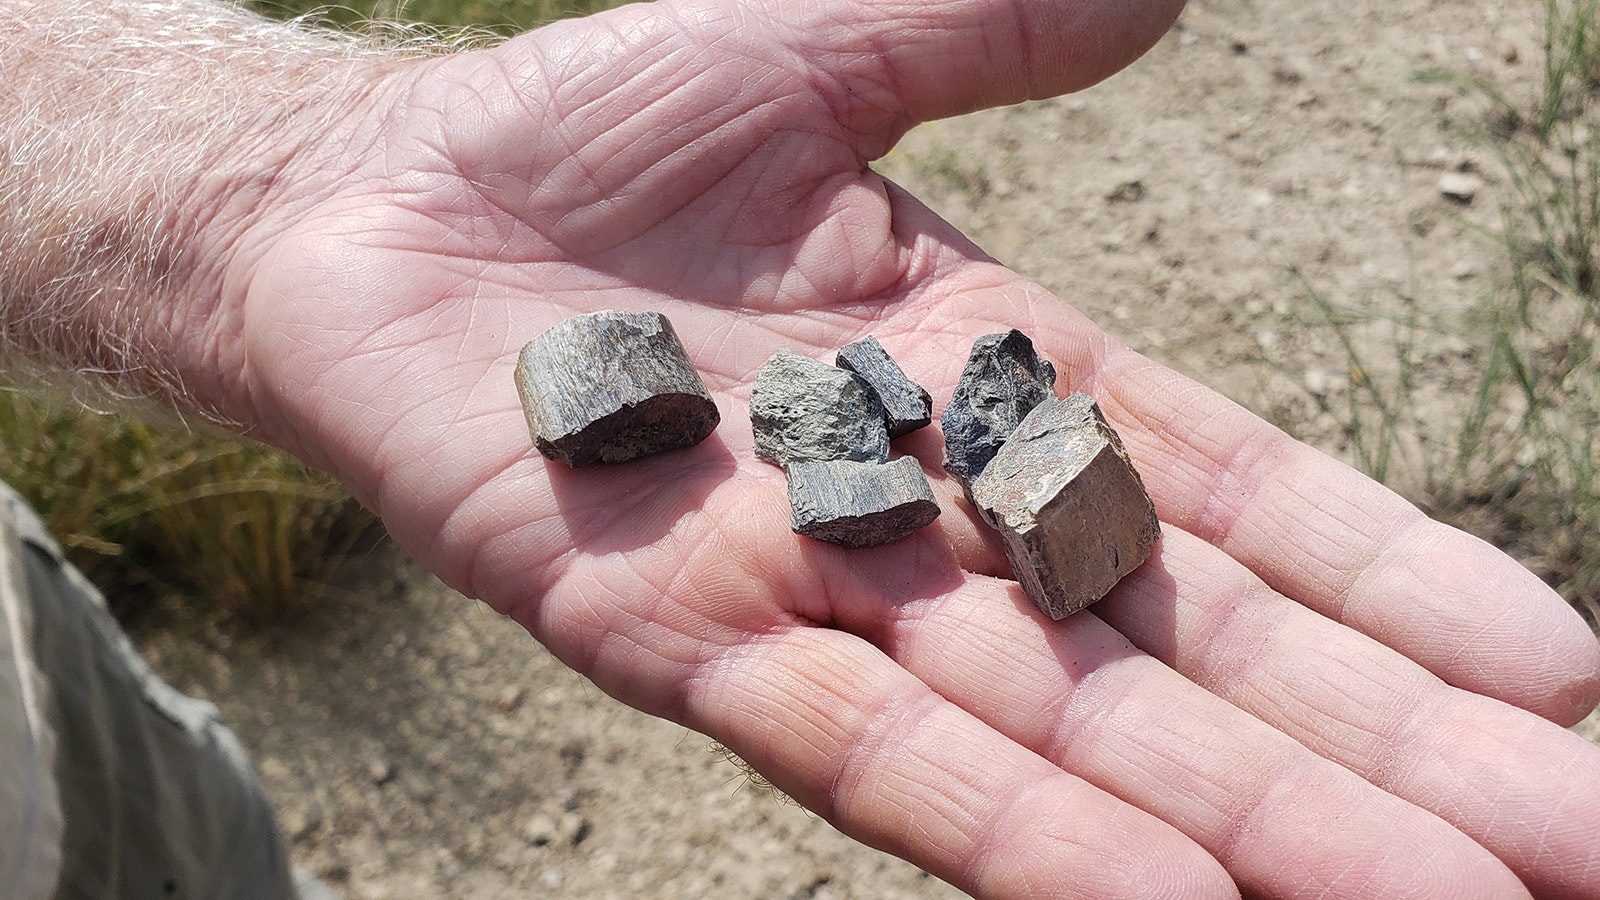 Small pieces of dinosaur bone like this are common finds at the Sheridan College quarries and are often found just lying out on the surface of the ground.